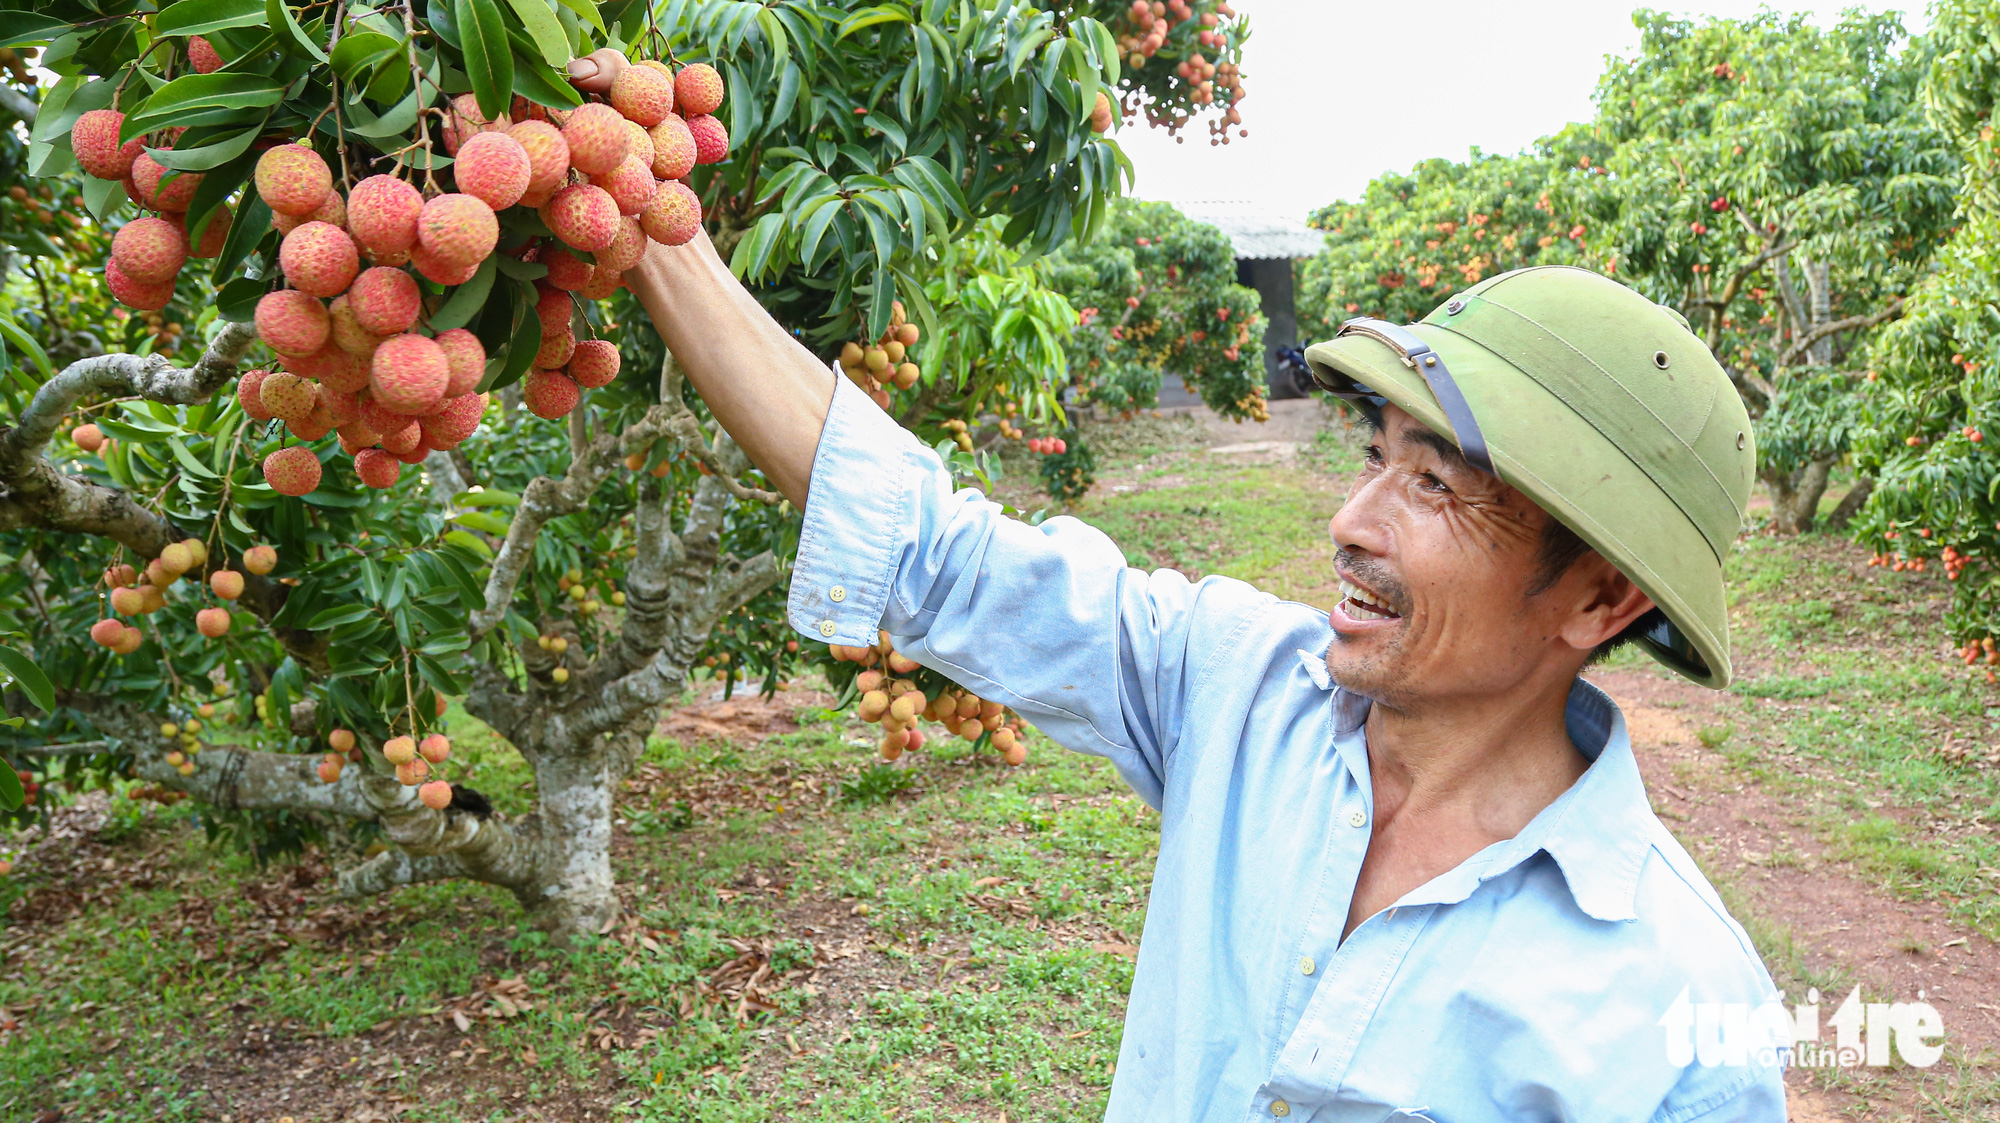 Lychee farms in Luc Ngan District are fruitful. When lychees are ripe, either traders will come to gardens to harvest lychees, or farmers will pick the fruit and transport to purchase points. A photo shows Vu Van Men harvesting lychees at his organic lychee garden. Men said that as his lychees meet VietGAP standards, the price of each kilogram will be VND5,000-10,000 higher than others. Photo: Ha Quan / Tuoi Tre